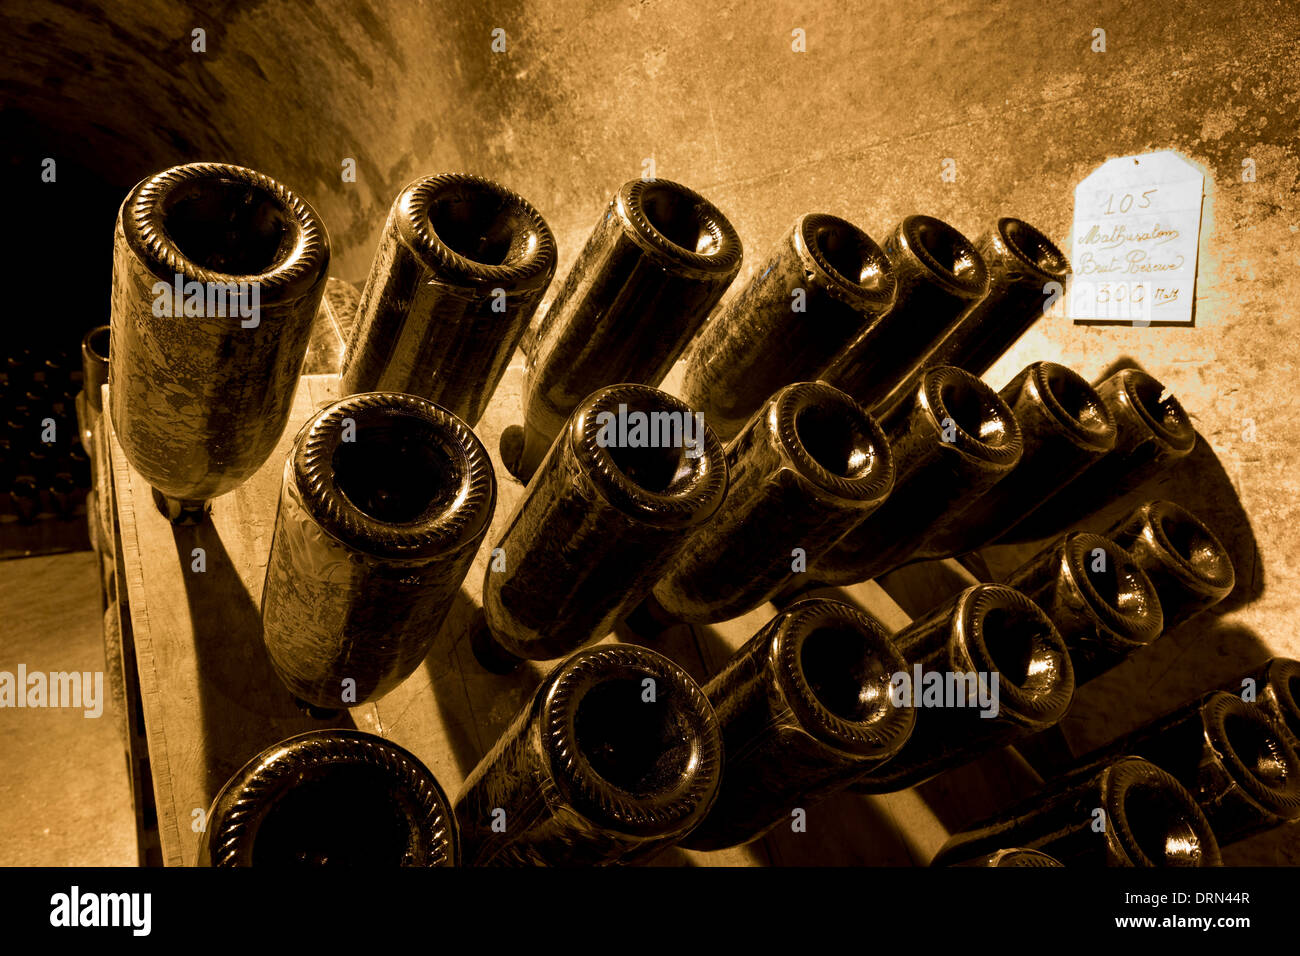 Methusalem bottles of champagne brut reserve in frames for remuage turning in caves of Champagne Taittinger in Reims, France Stock Photo